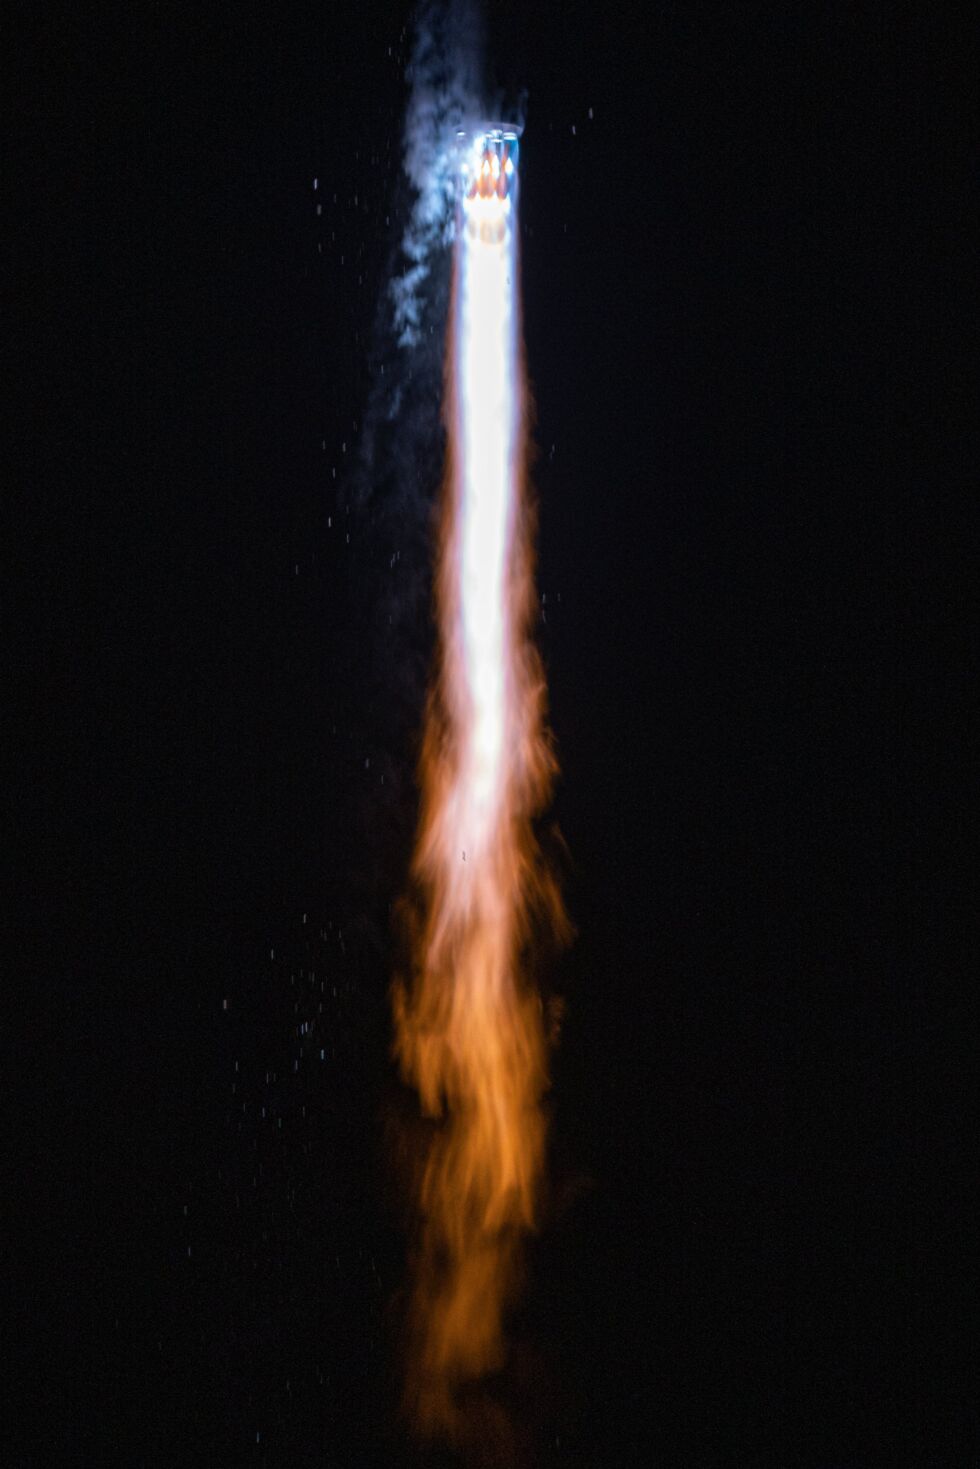 The Terran 1 produced some lovely blue flames during its ascent.